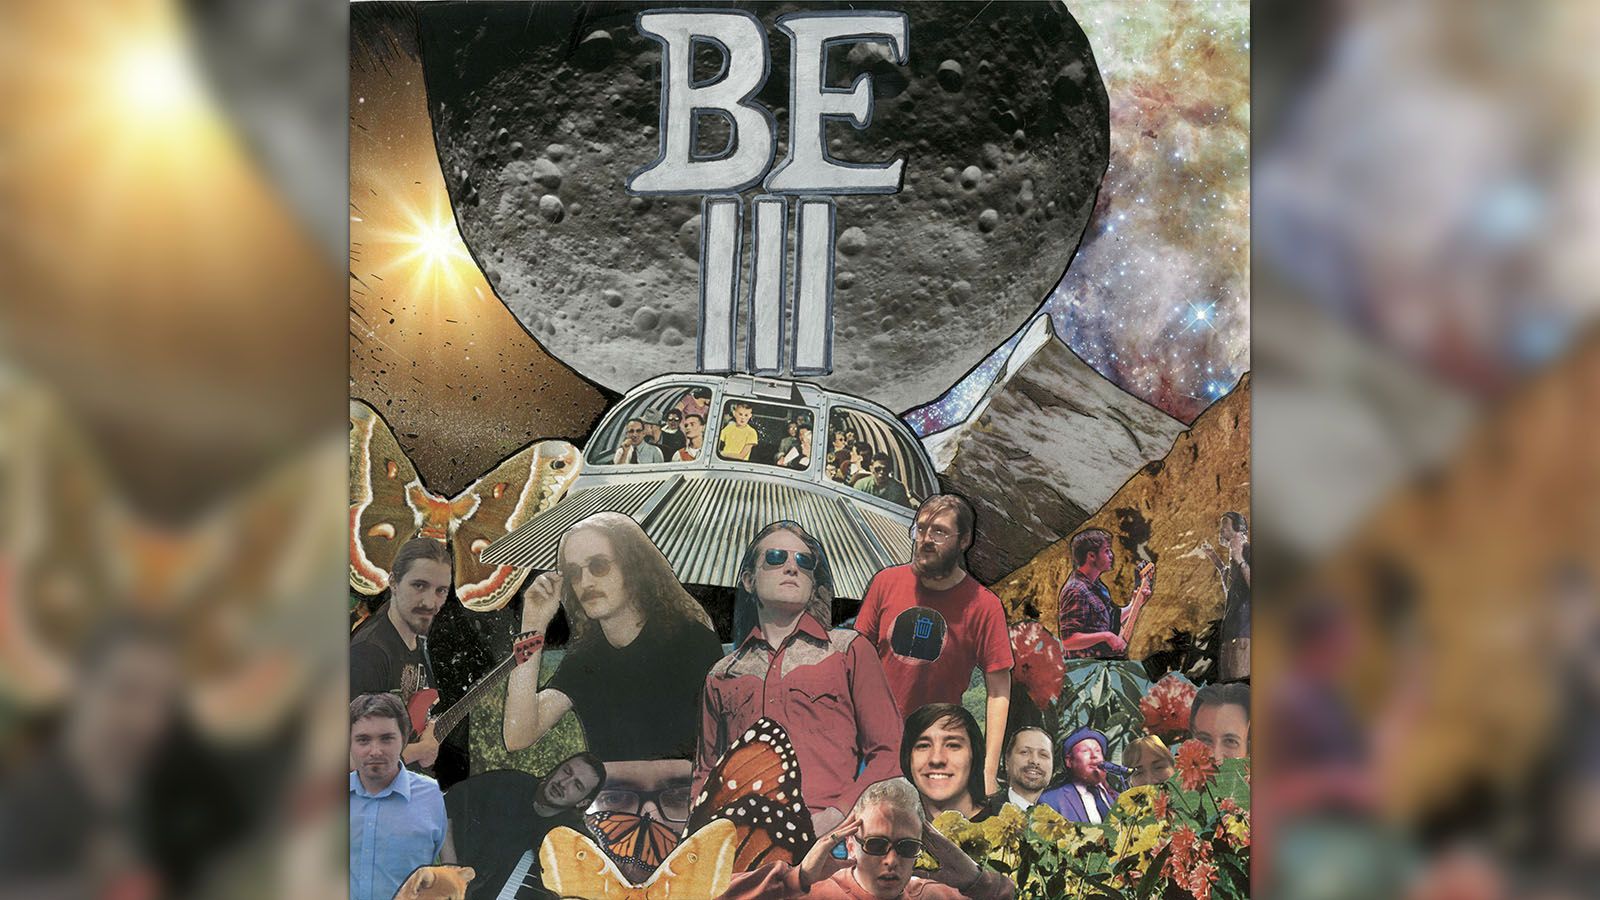 The Be Colony show growth on their latest album.